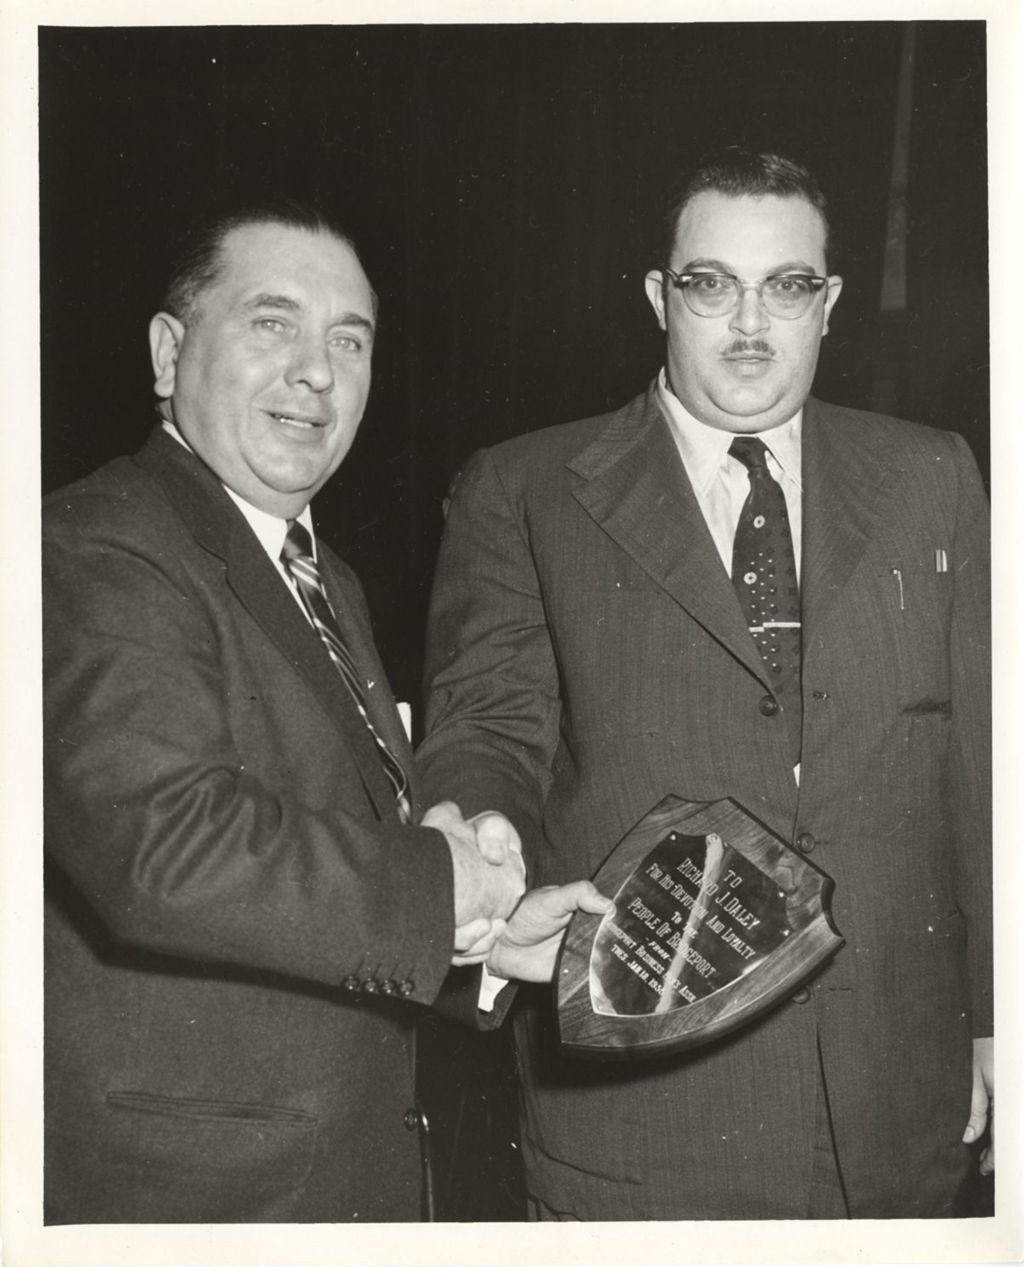 Miniature of Richard J. Daley accepting a plaque